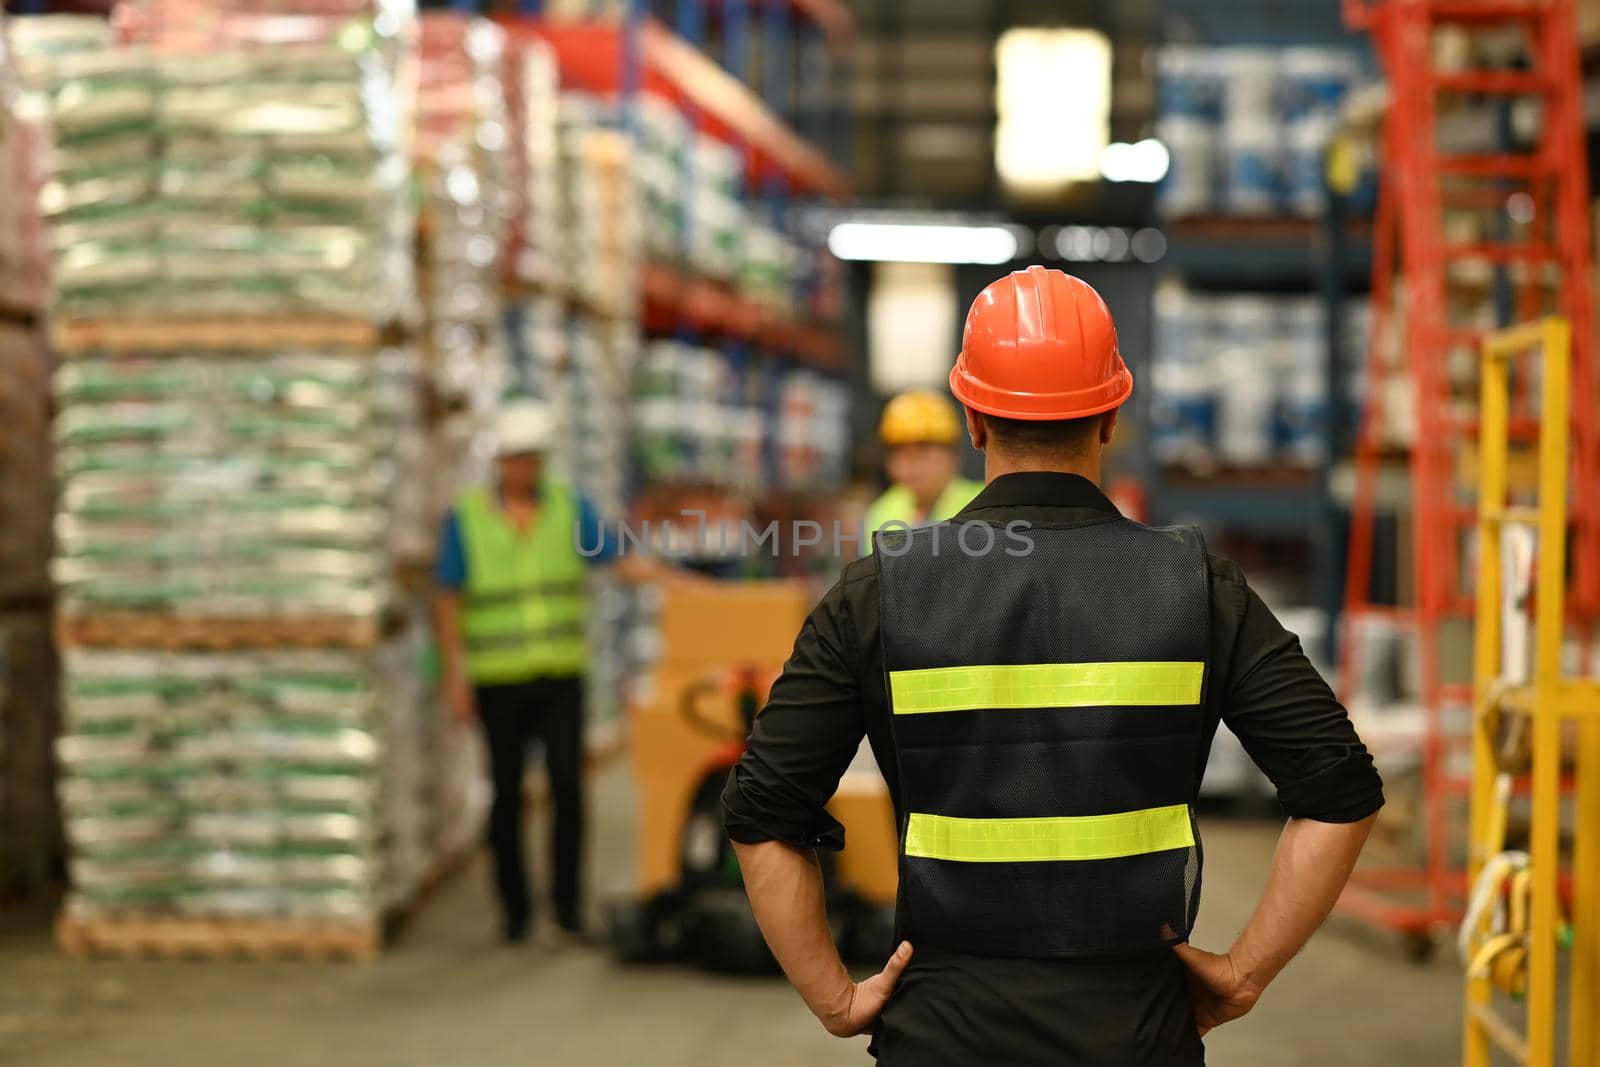 Rear view of male manager wearing hardhats and reflective jackets standing in a warehouse with packed boxes on shelves in background by prathanchorruangsak